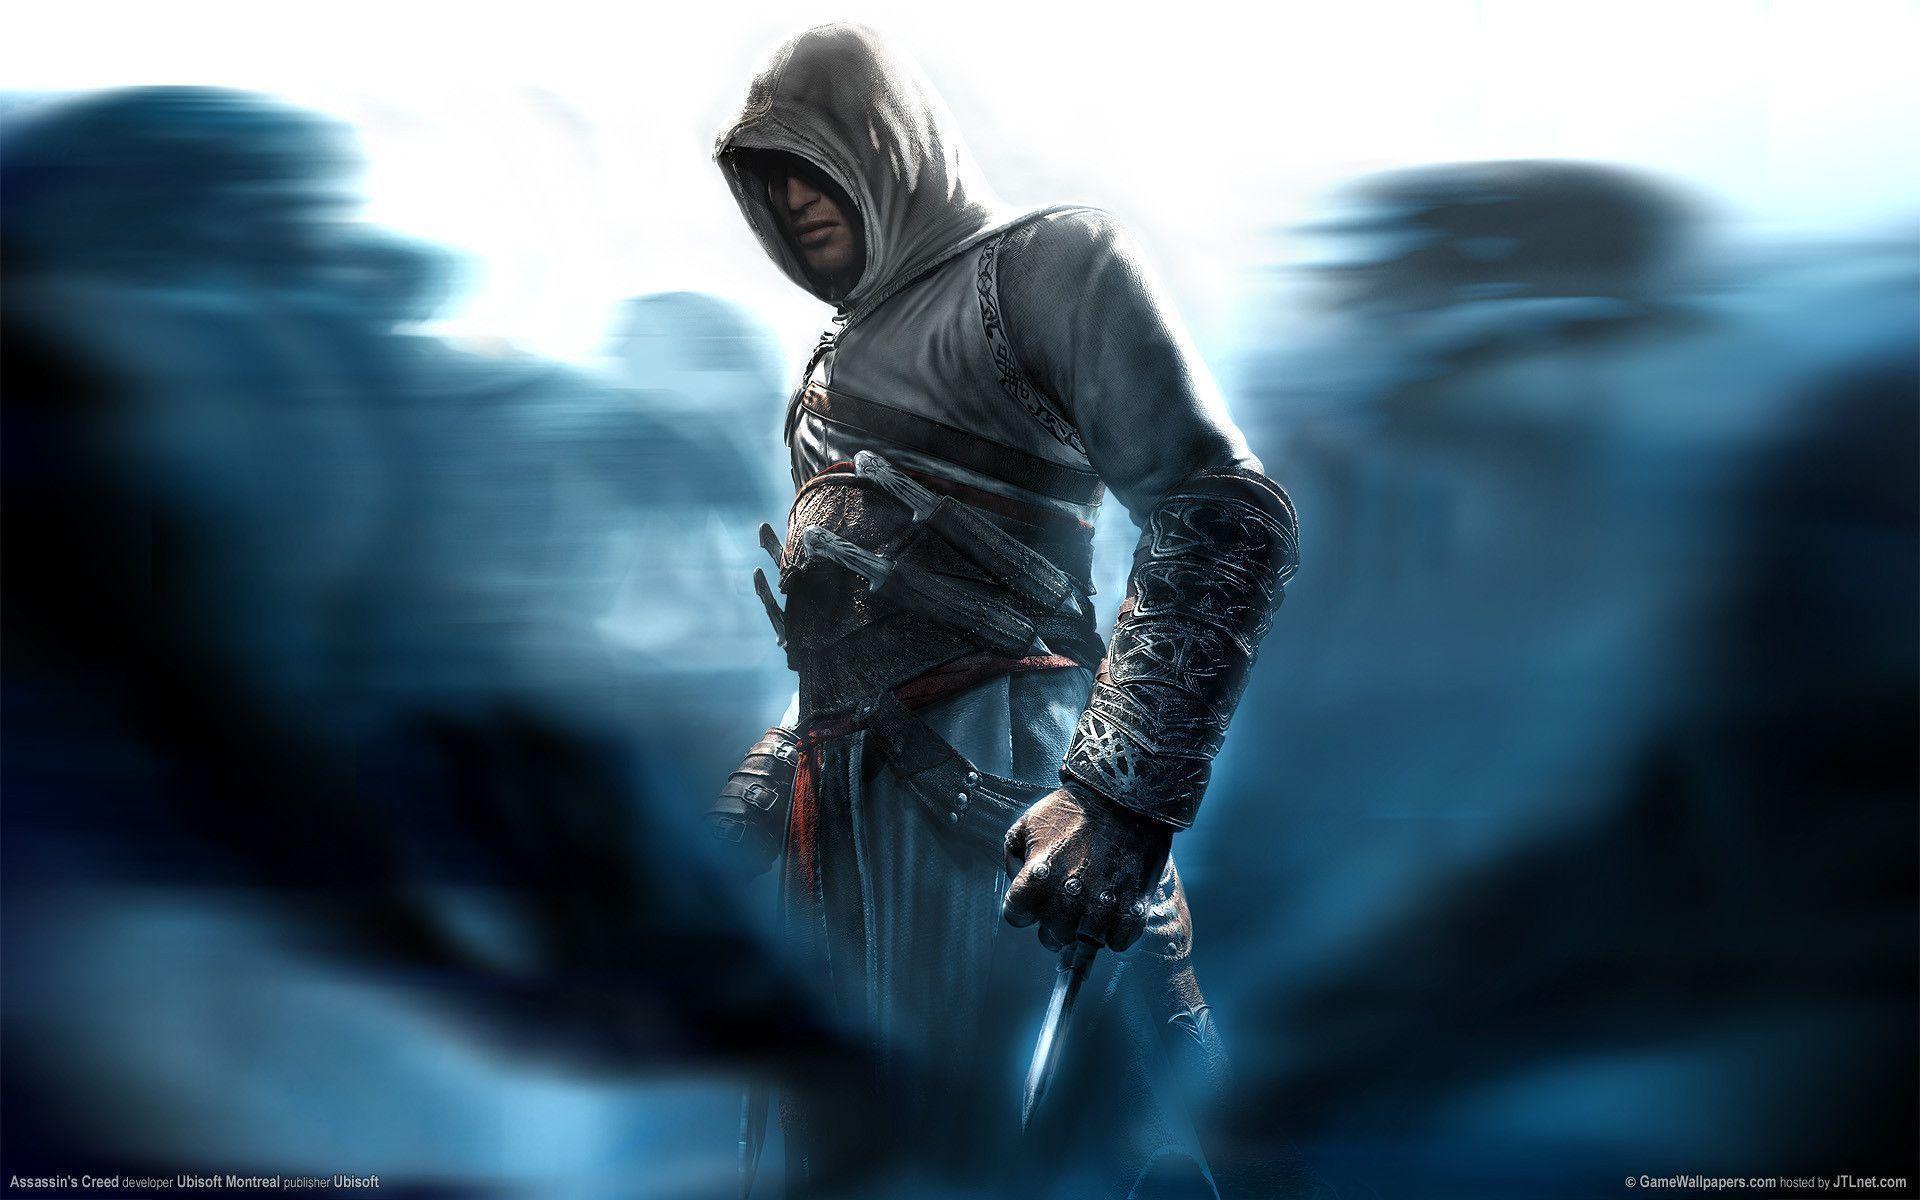 Awesome Assasins Creed Wallpaper Design Utopia Trend